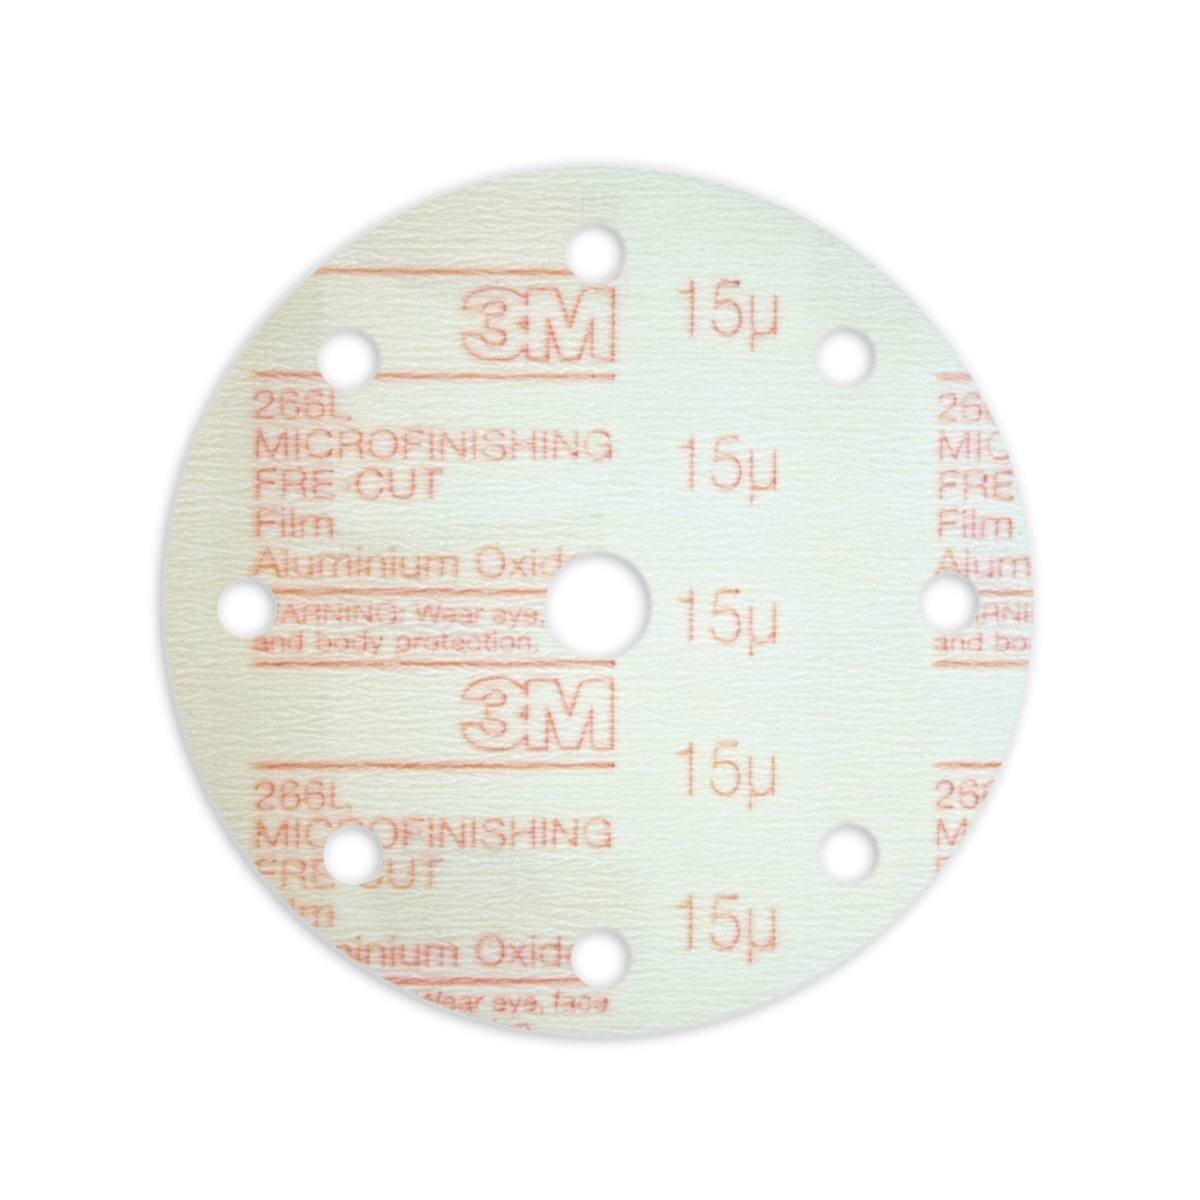 3M Hookit Velcro-backed microfinishing film disc 266L, 150 mm, non-perforated, 15 microns #00045